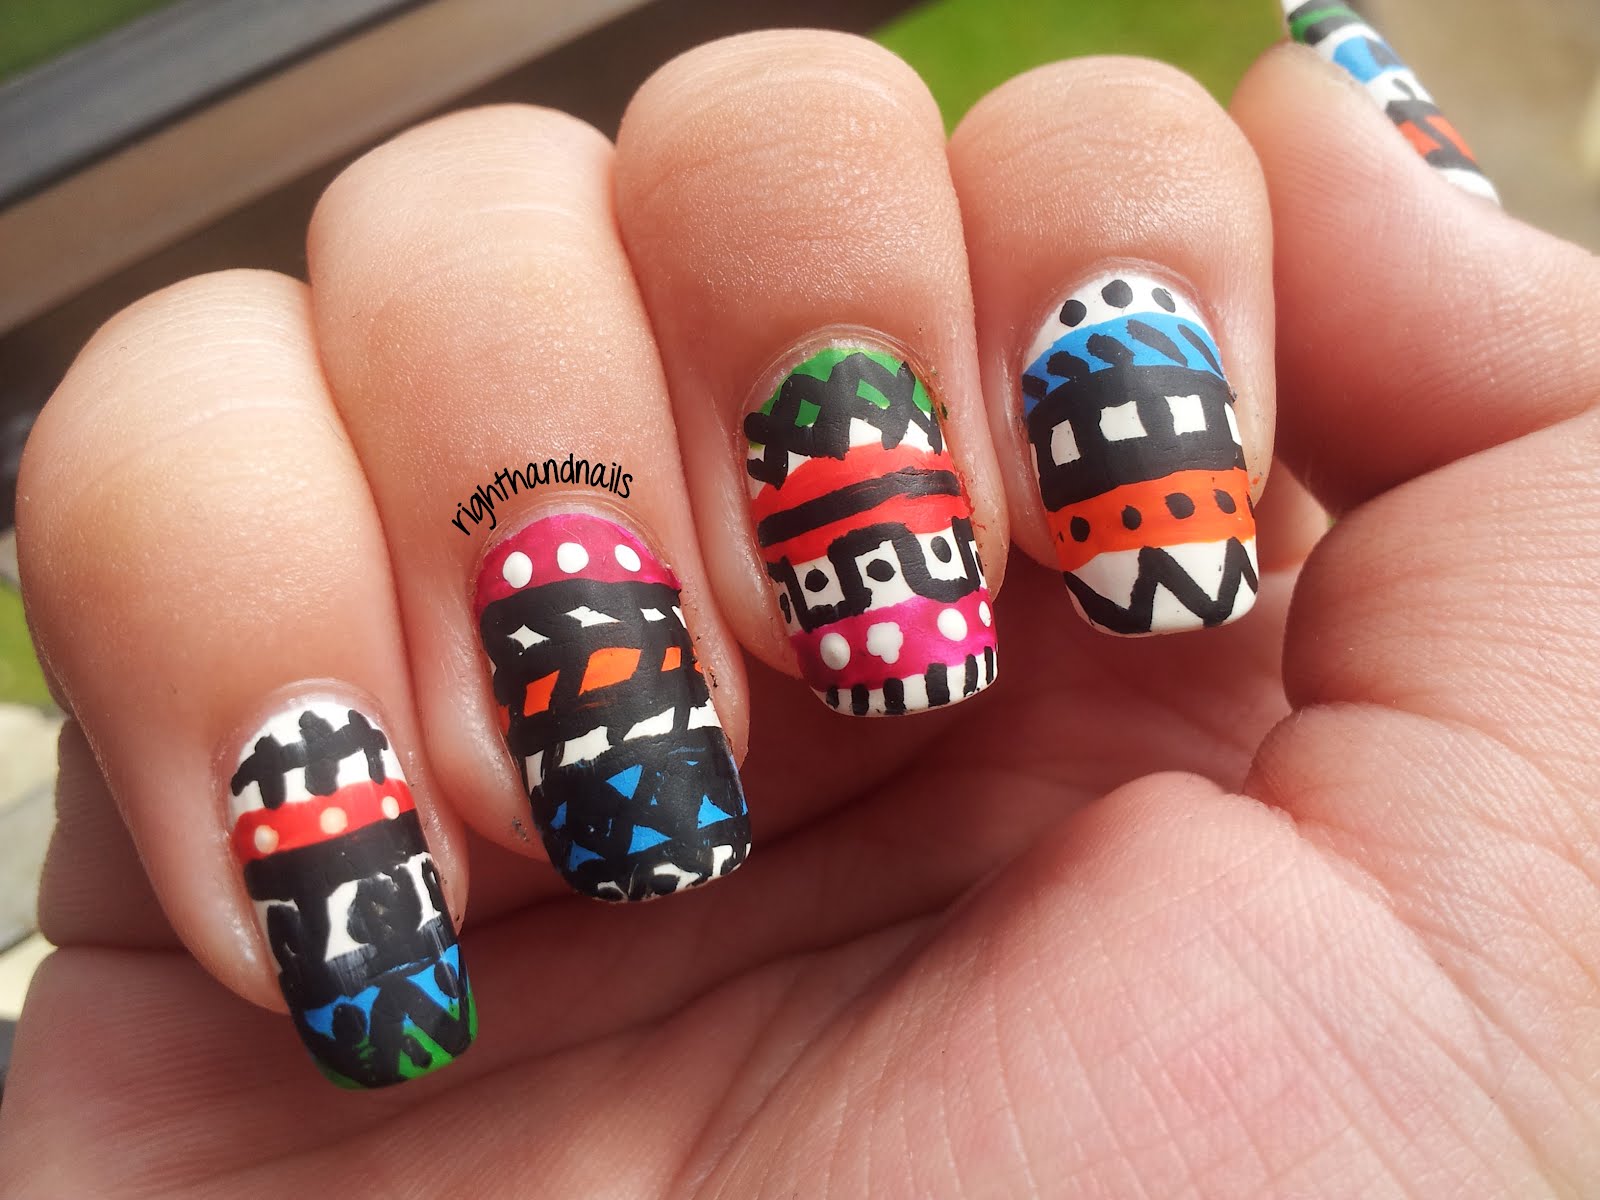 2. Tribal Nail Designs - wide 3